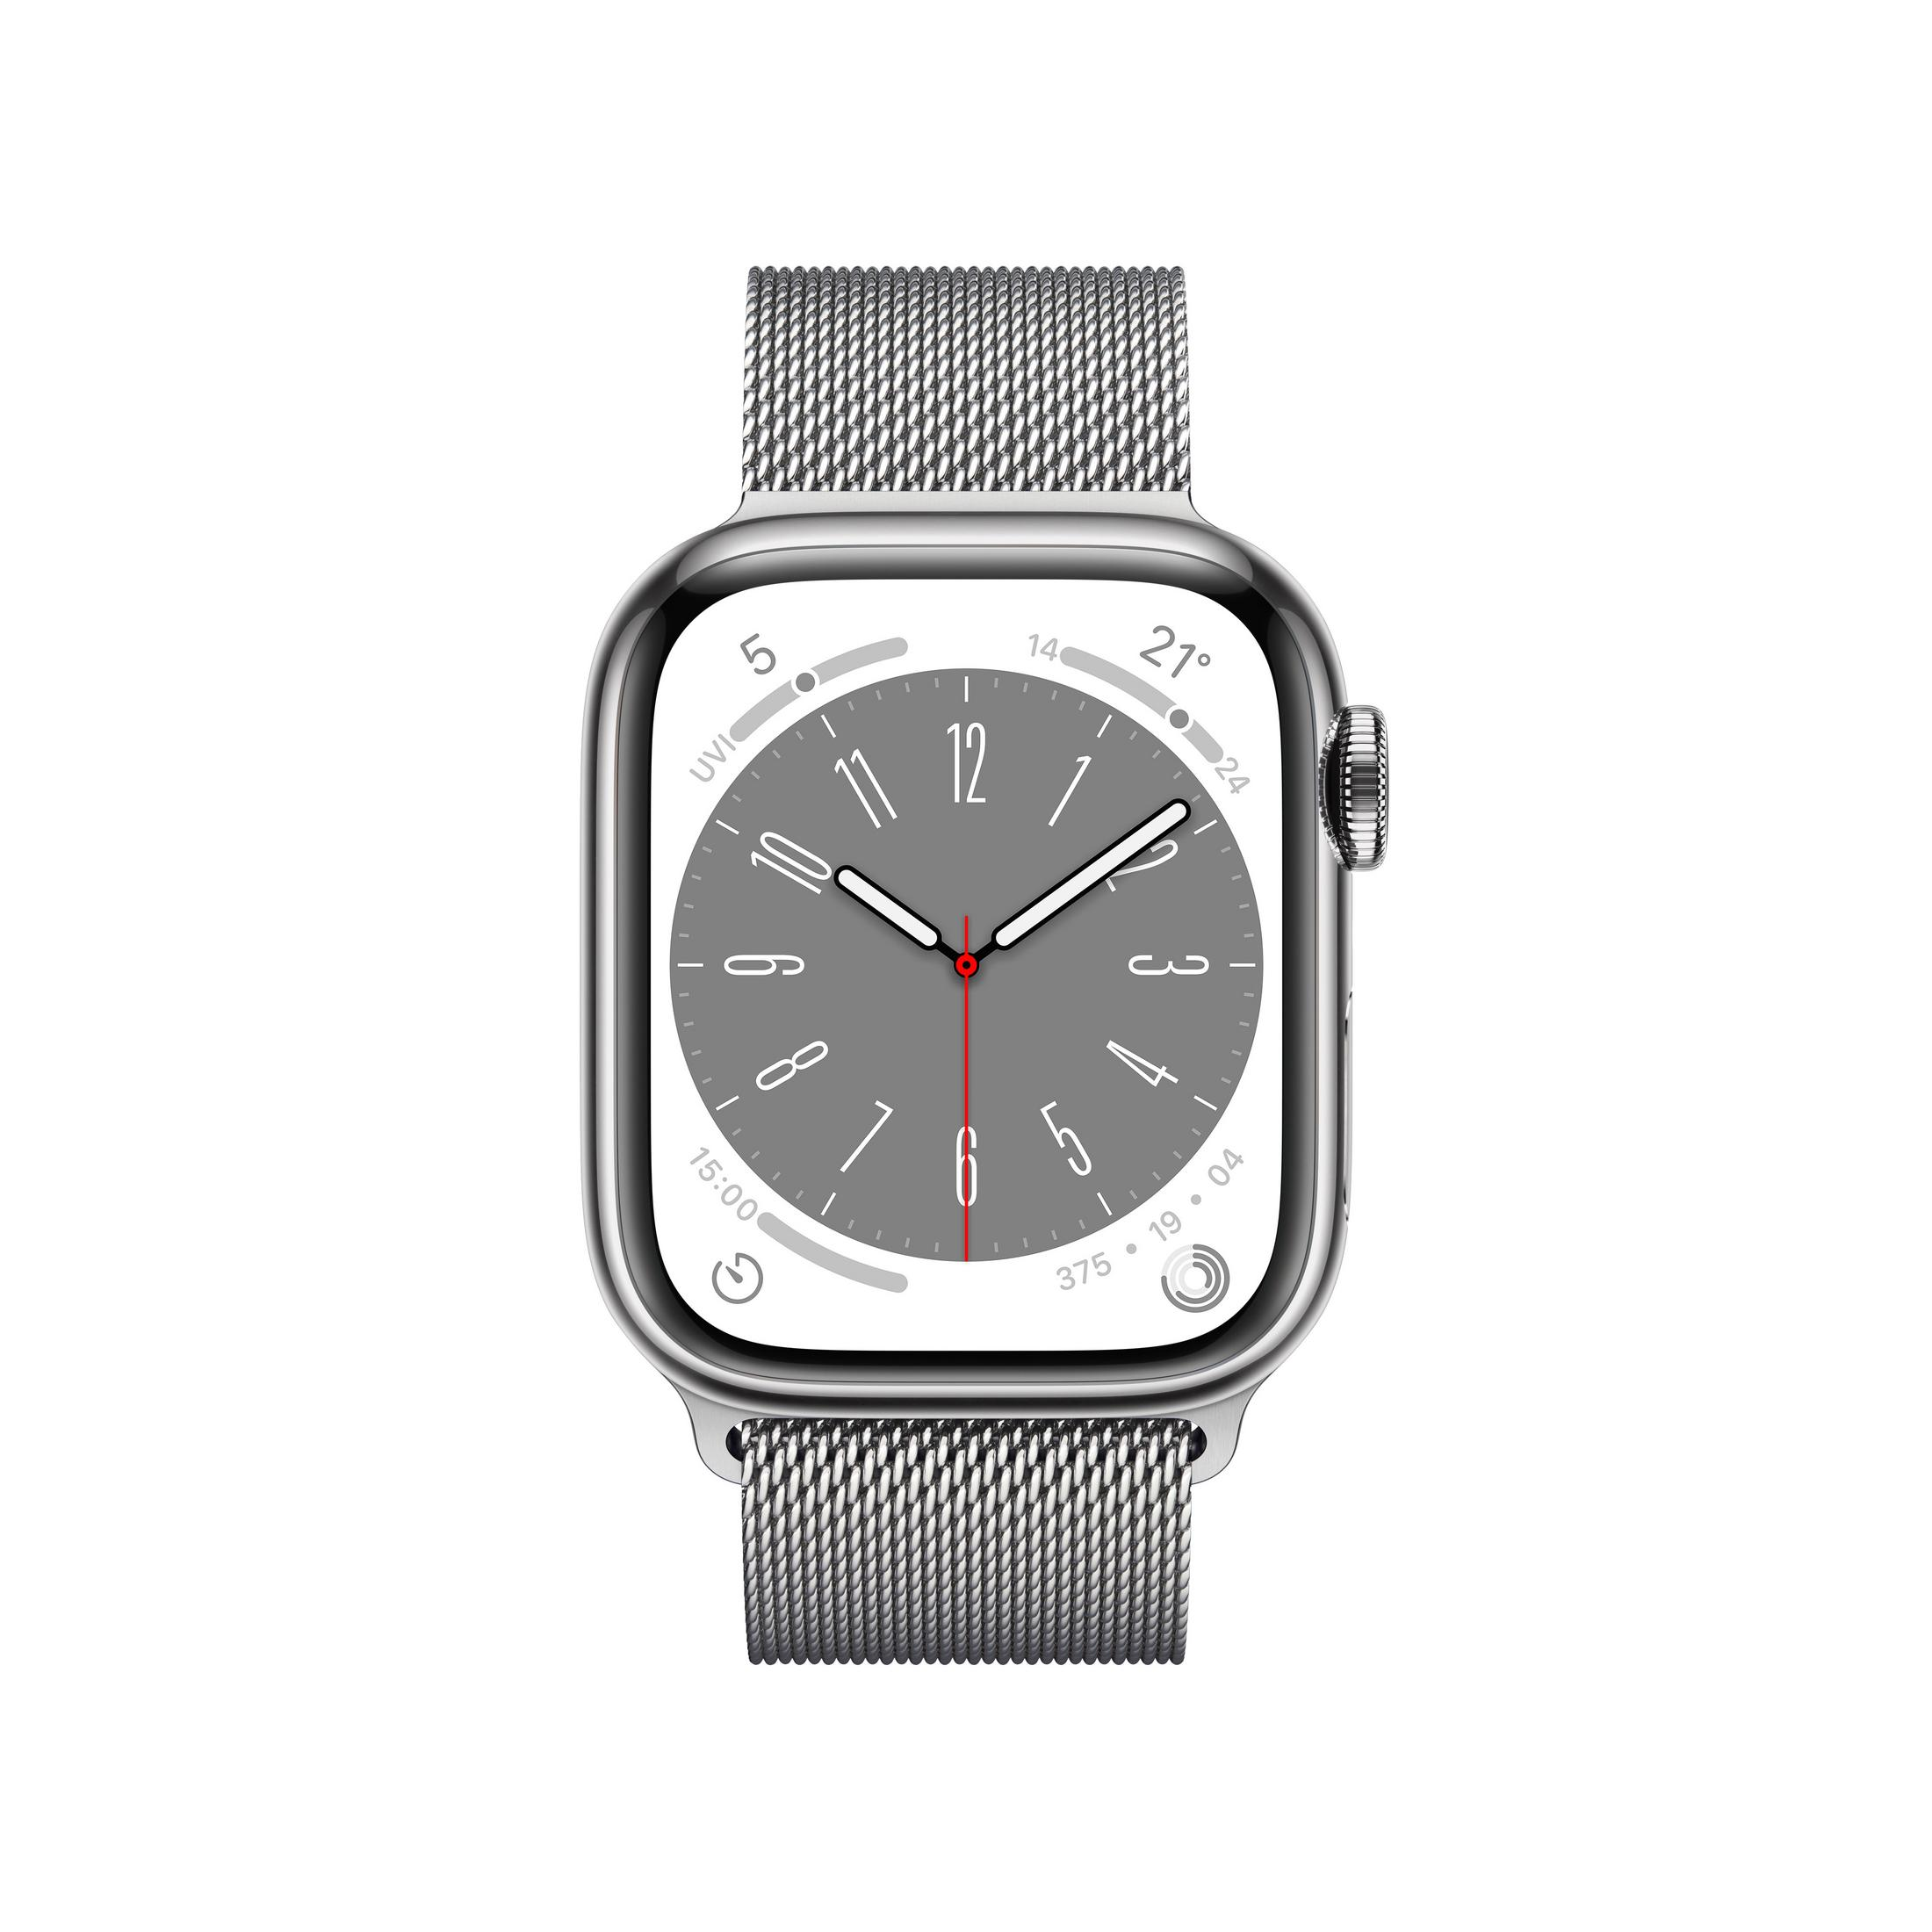 APPLE S8 GPS+CEL 41 SIL - STAINL Smartwatch MILANESE Edelstahl 200 WITH Silber, ST Silber Armband: Milanaise, W mm, Gehäuse: SIL 130